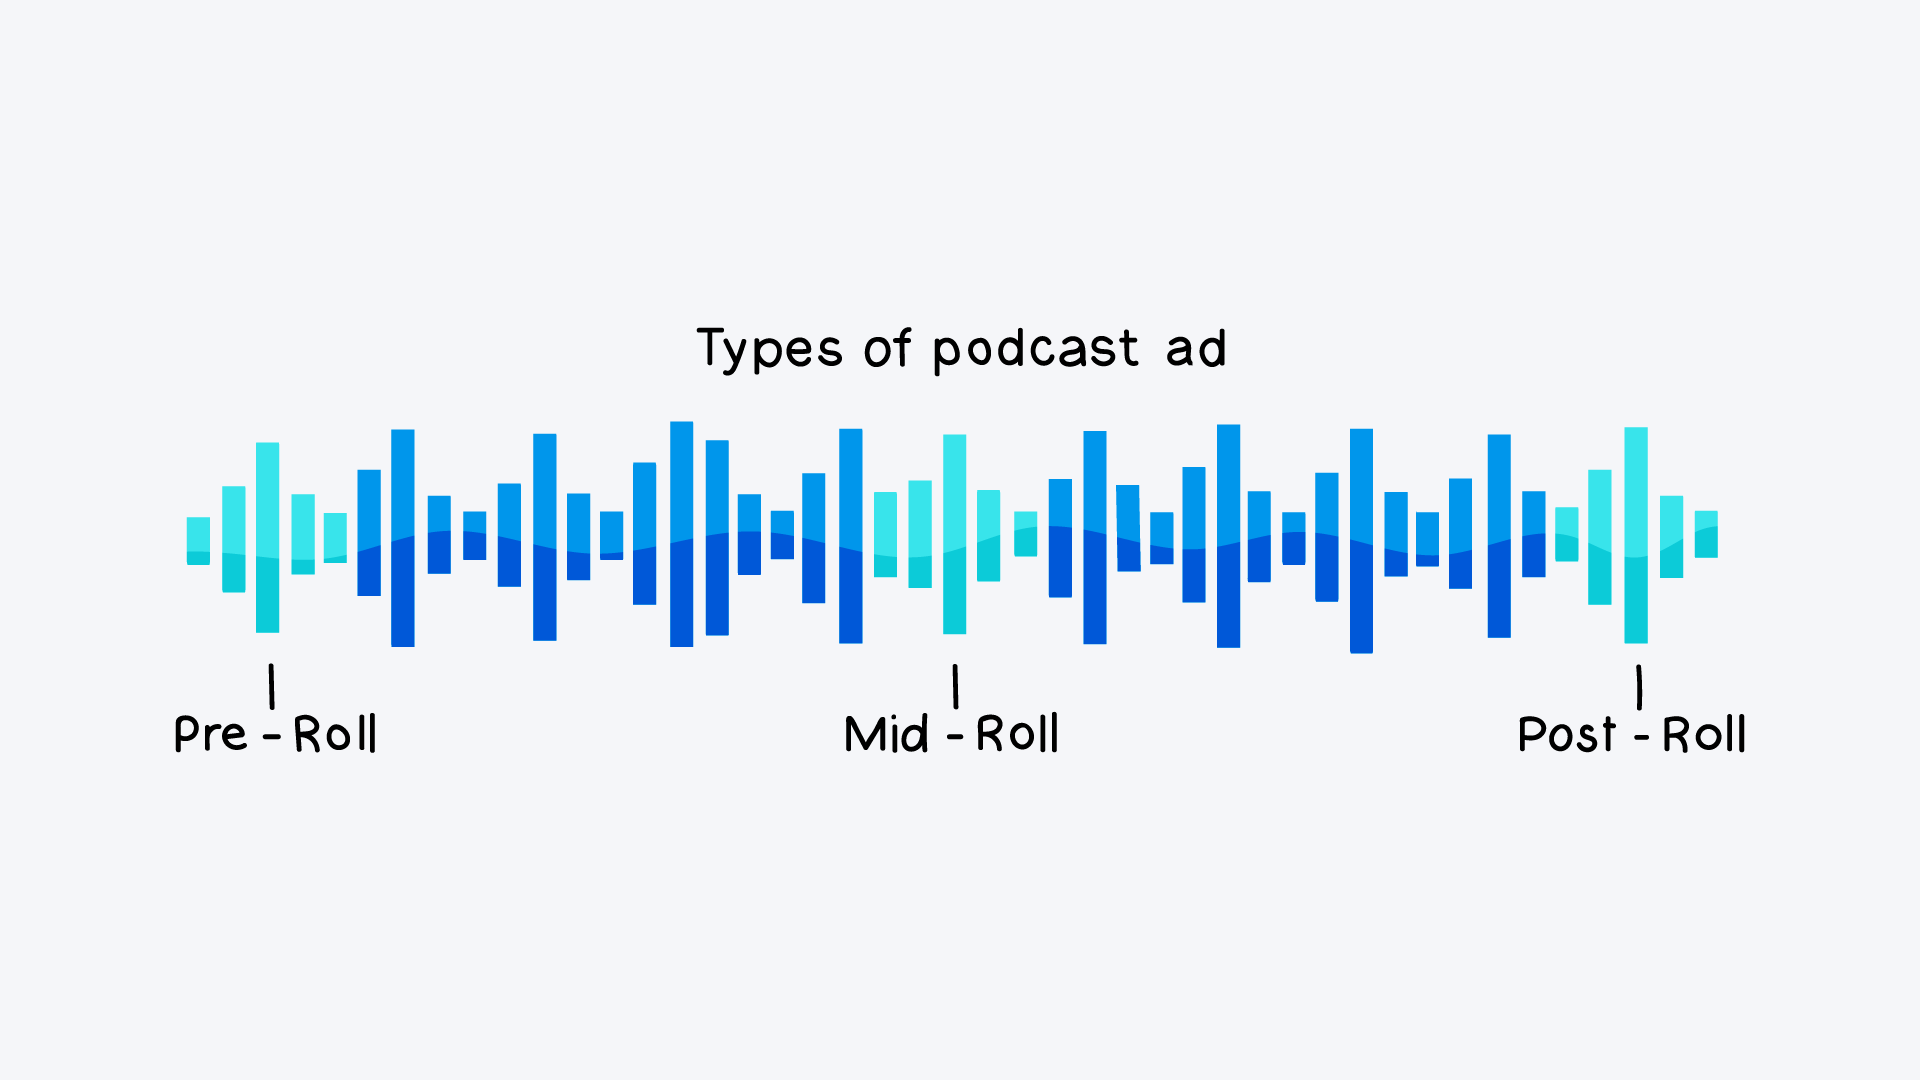 Podcast ad position